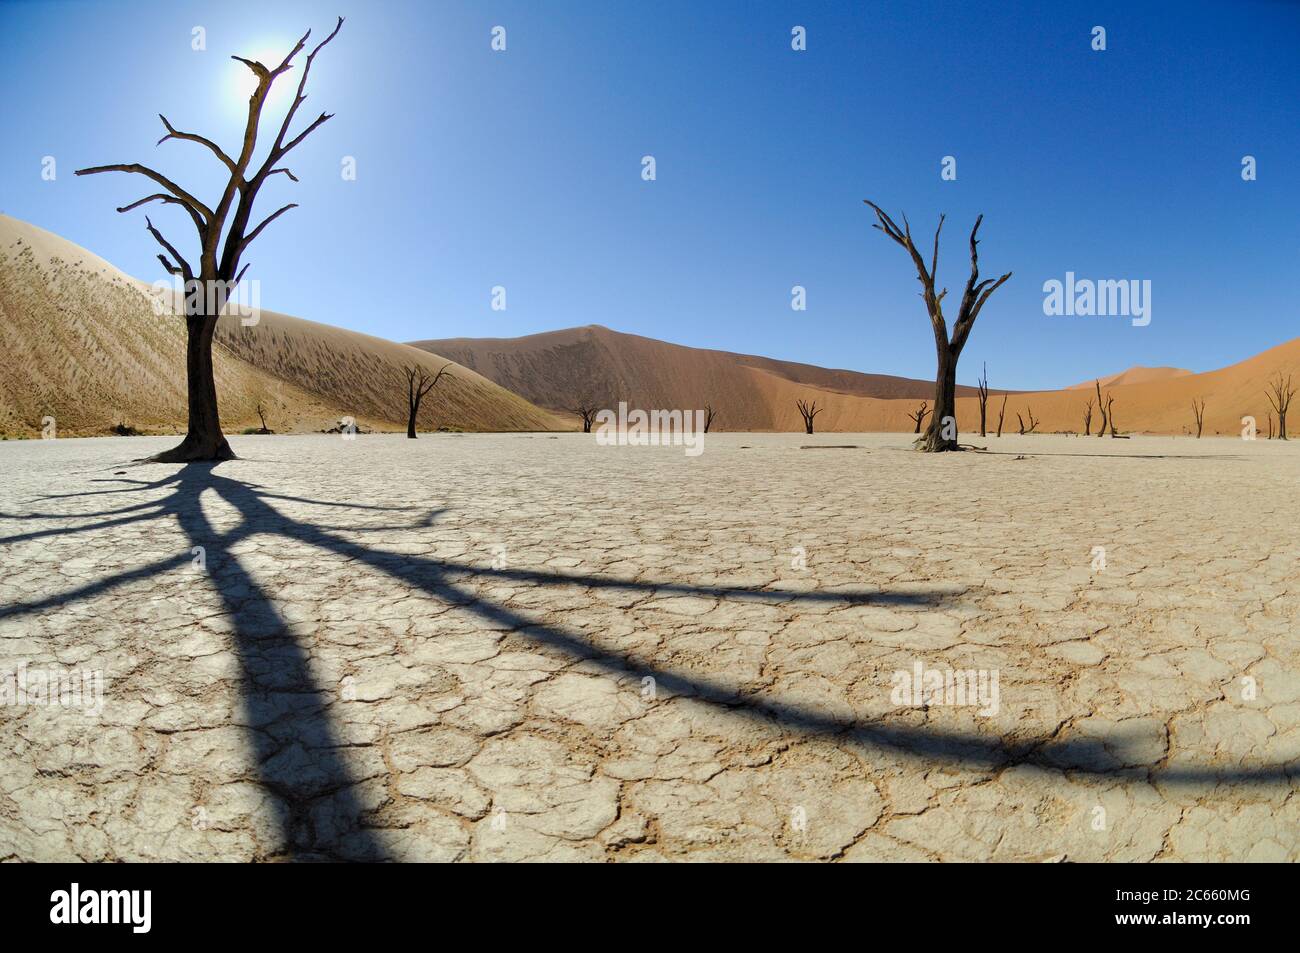 Sesriem Sossusvlei sand dune with dead trees, Deadvlei. Dried up salt pan and 5000 year old tree stumps Stock Photo